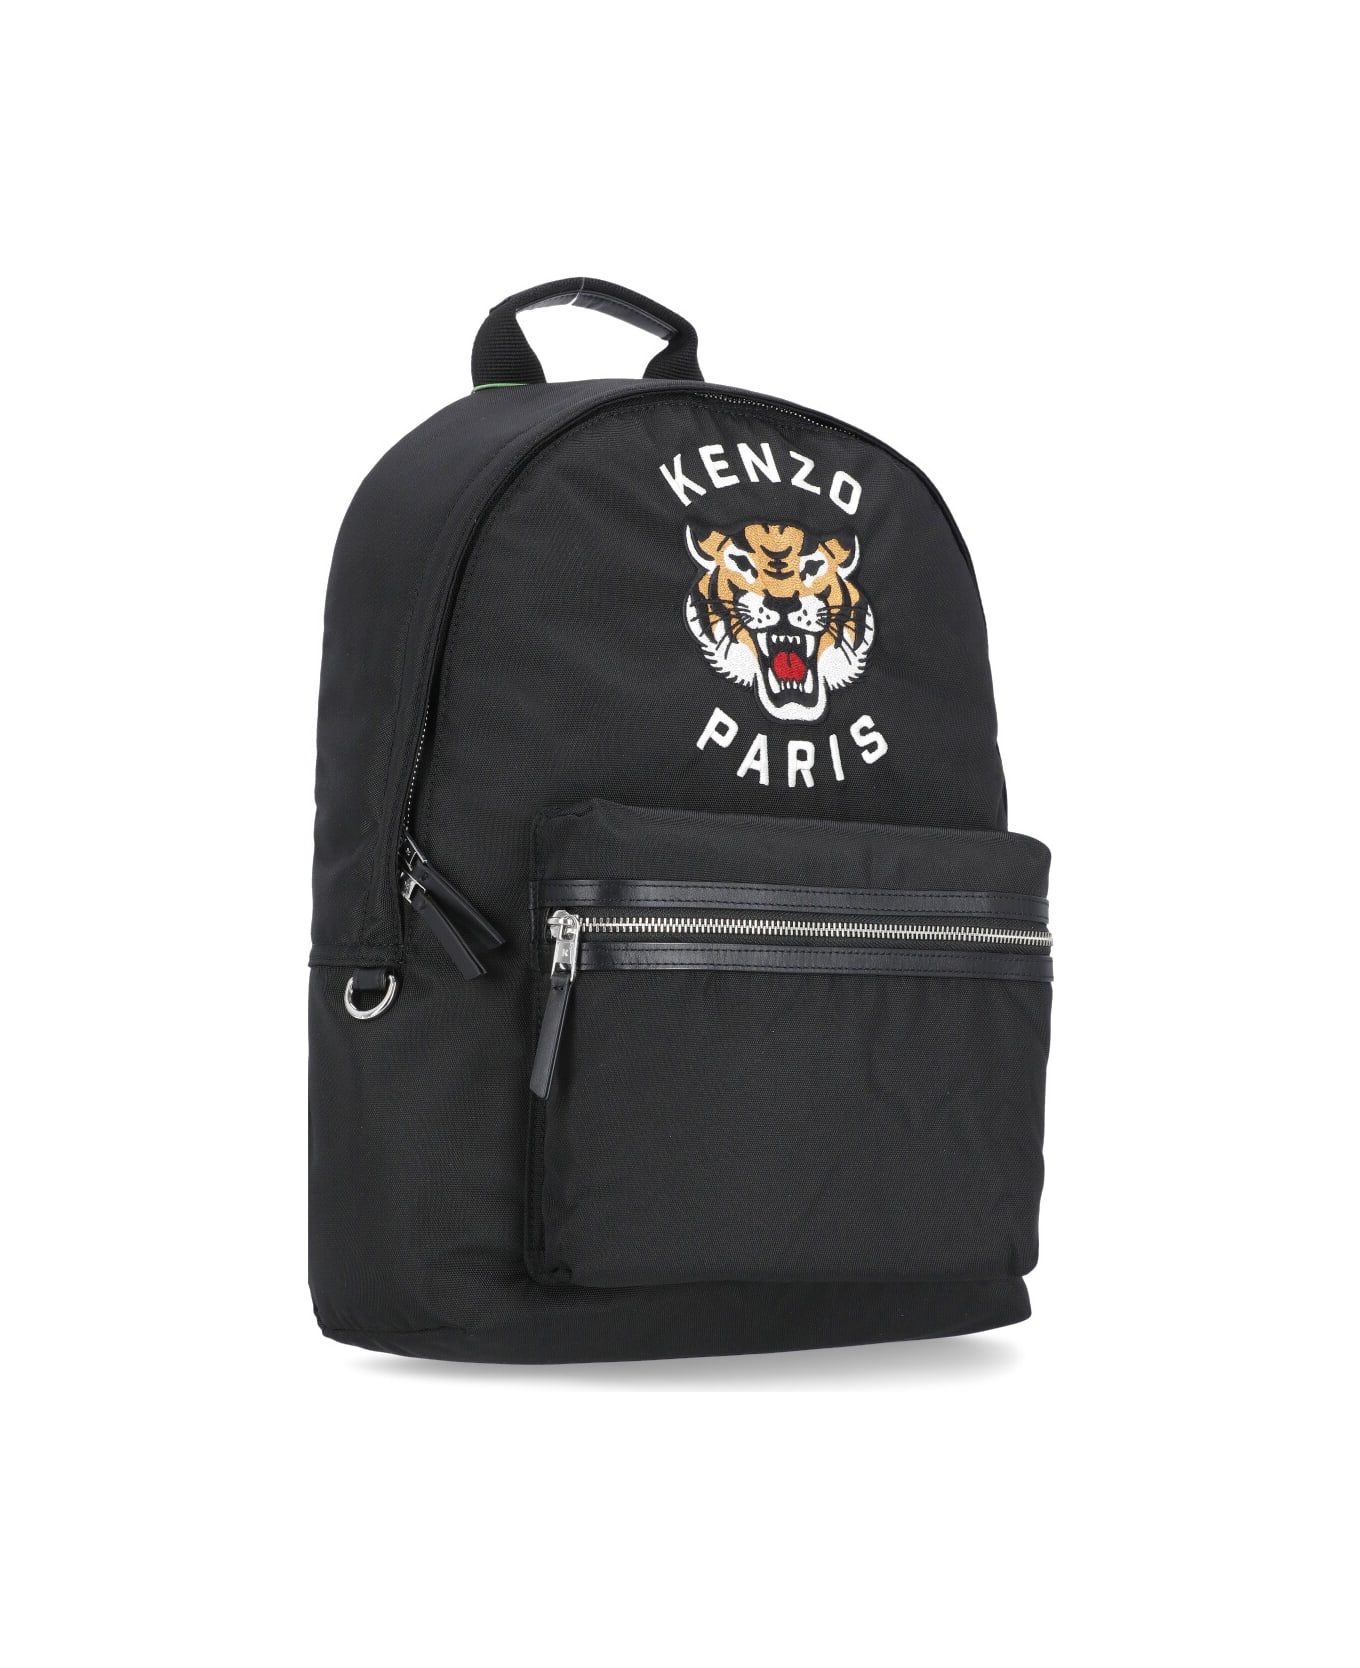 Kenzo Logo Embroidery Backpack - Black バックパック